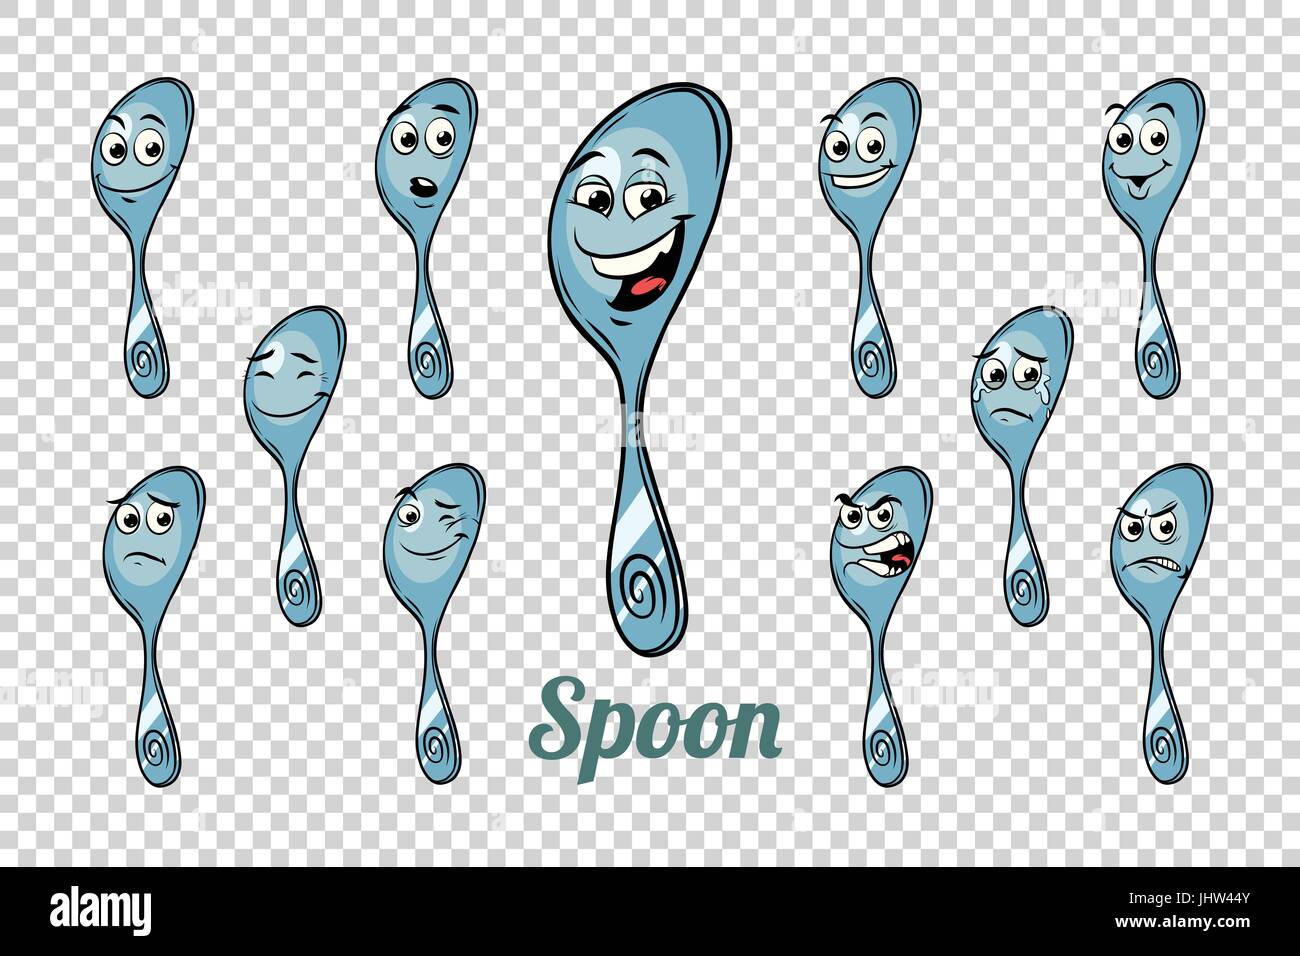 spoon emotions characters collection set. Isolated neutral background. Retro comic book style cartoon pop art vector illustration Stock Vector